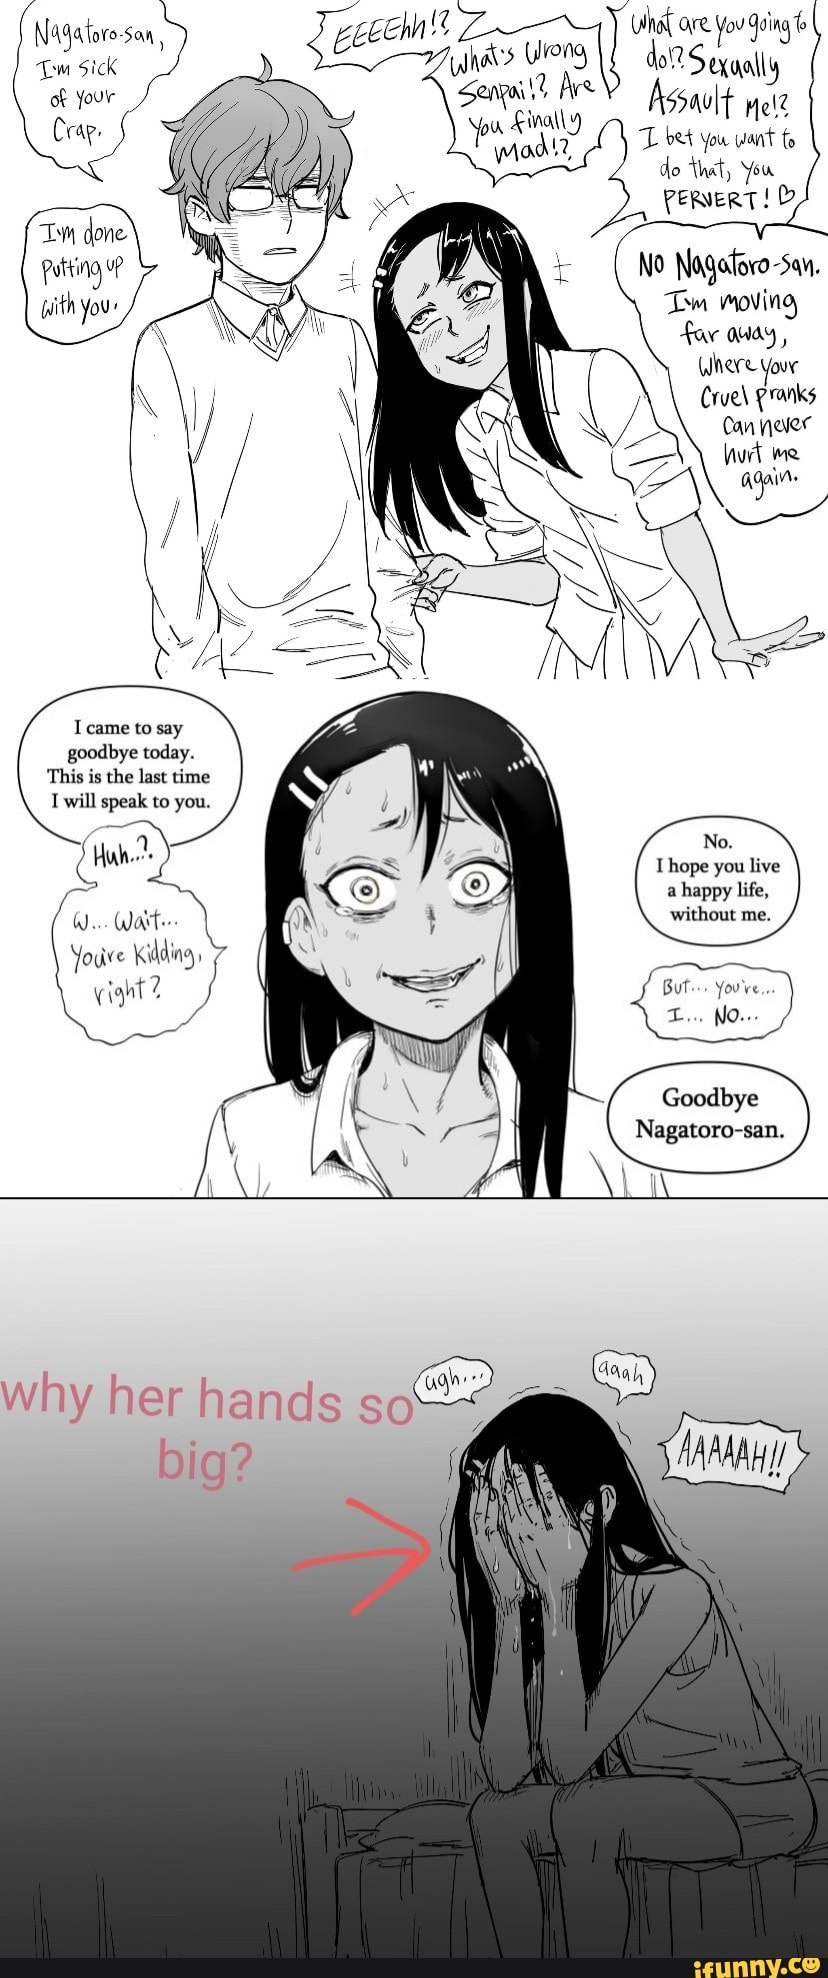 You will be able to sleep and smell Nagatoro-san in real life